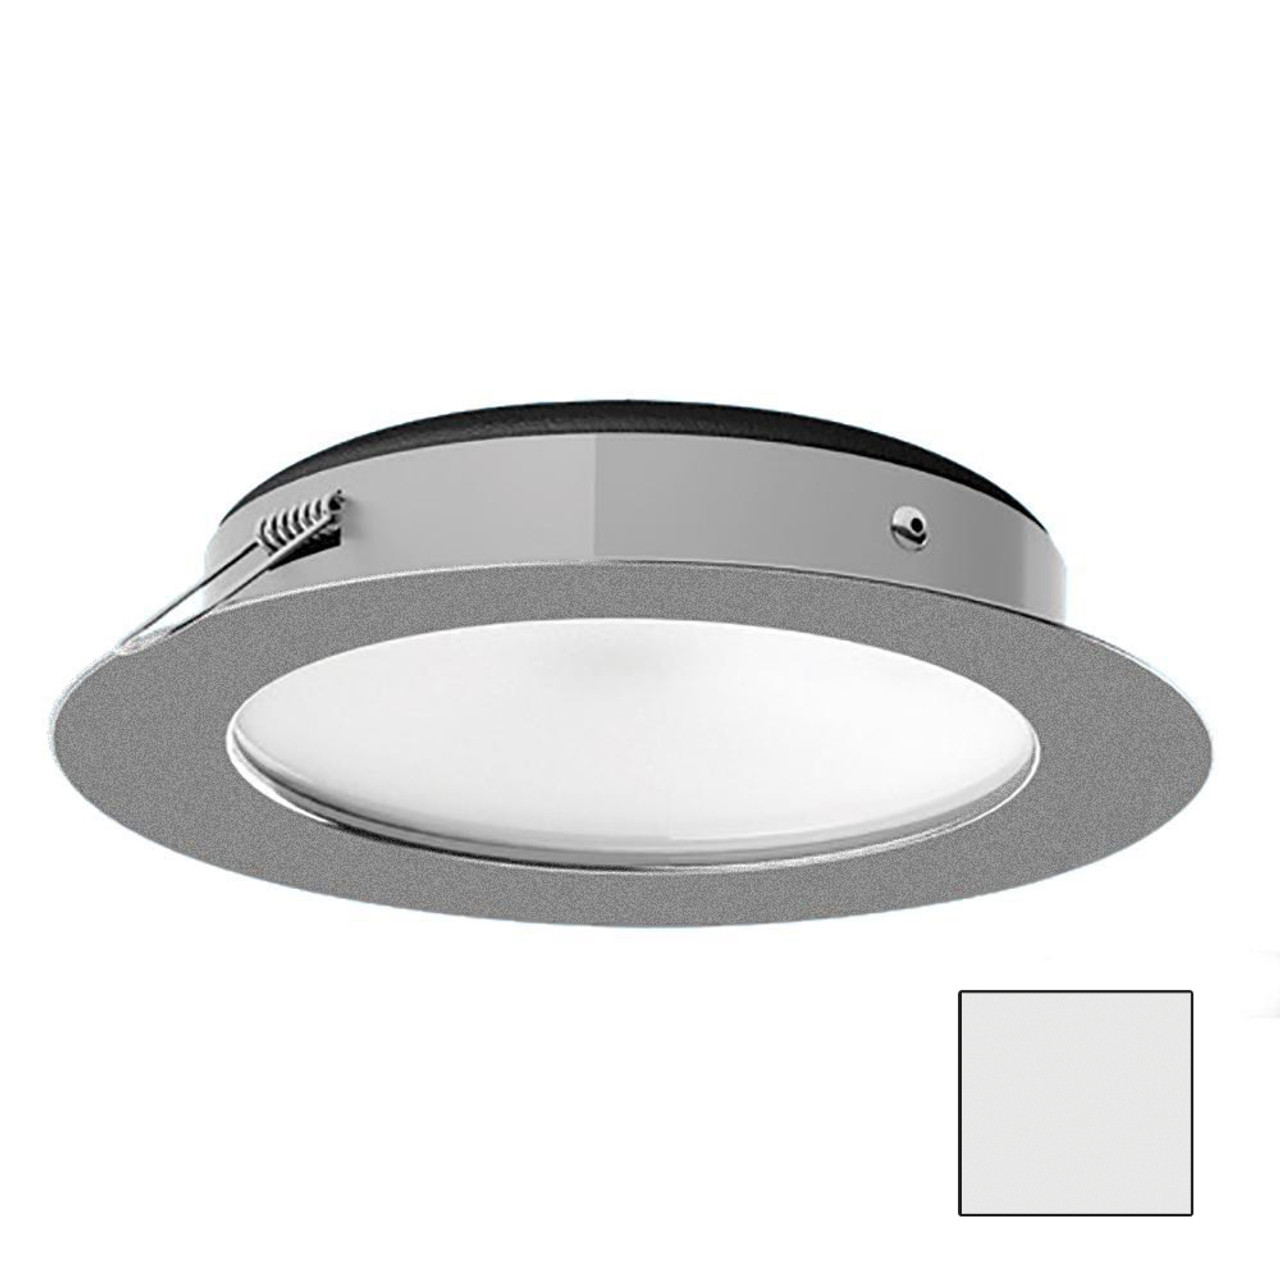 i2Systems - Apeiron Pro XL A526 - 6W, Spring Mount, Cool White, Brushed Nickel Finish - Apollo Lighting